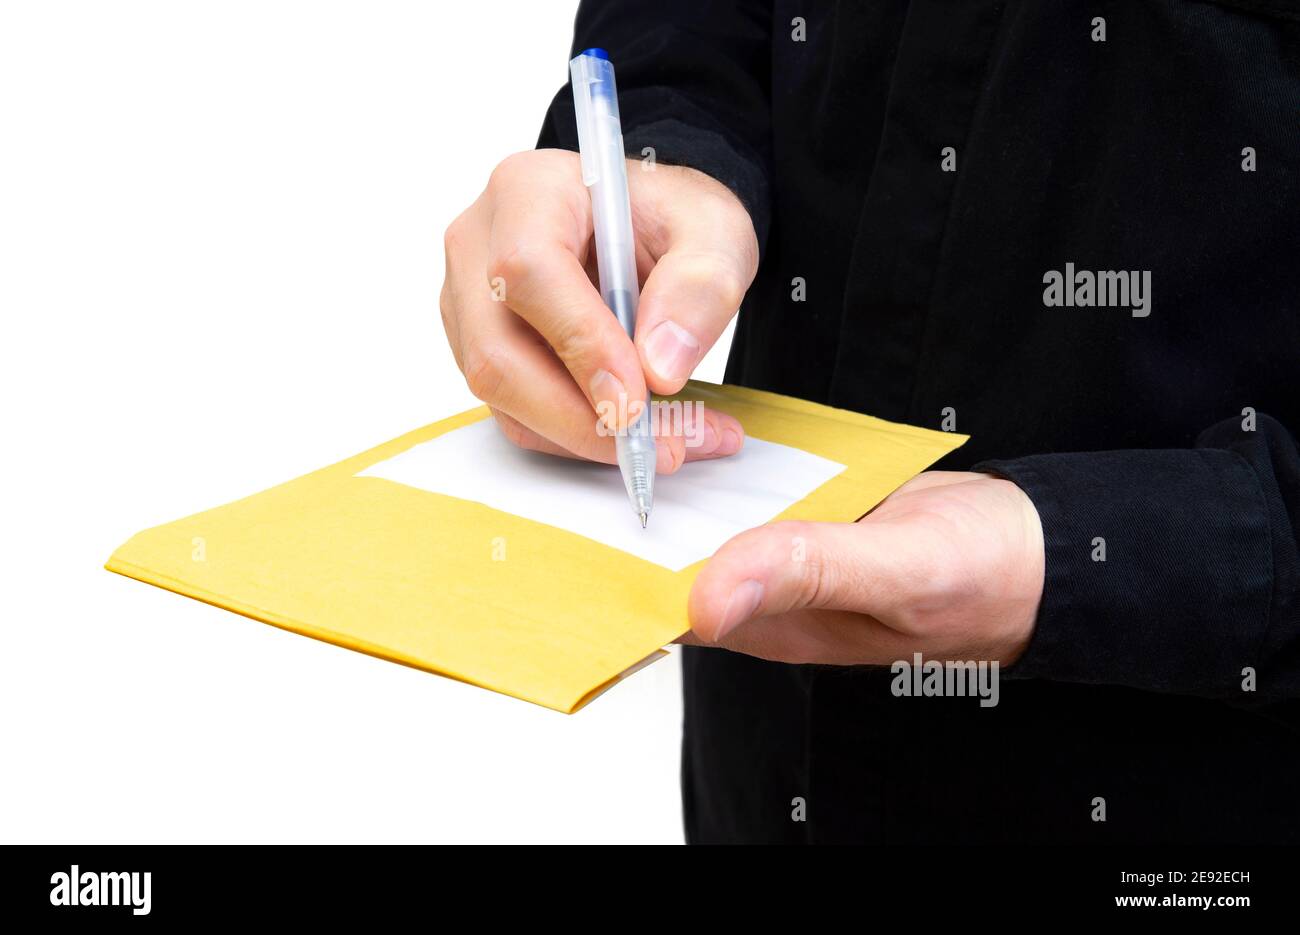 Man in a black uniform writes an address on a yellow padded envelope isolated on white Stock Photo